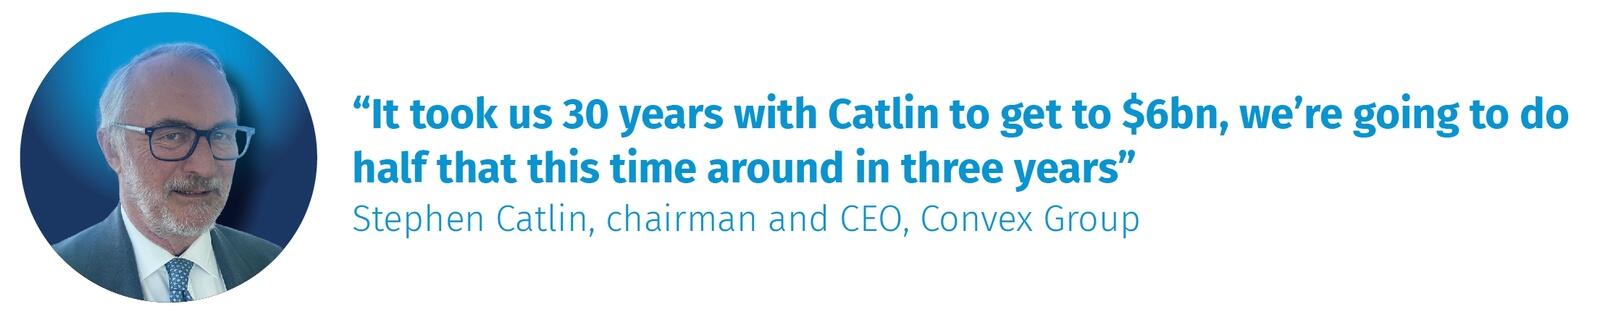 Stephen Catlin, chairman and CEO, Convex Group